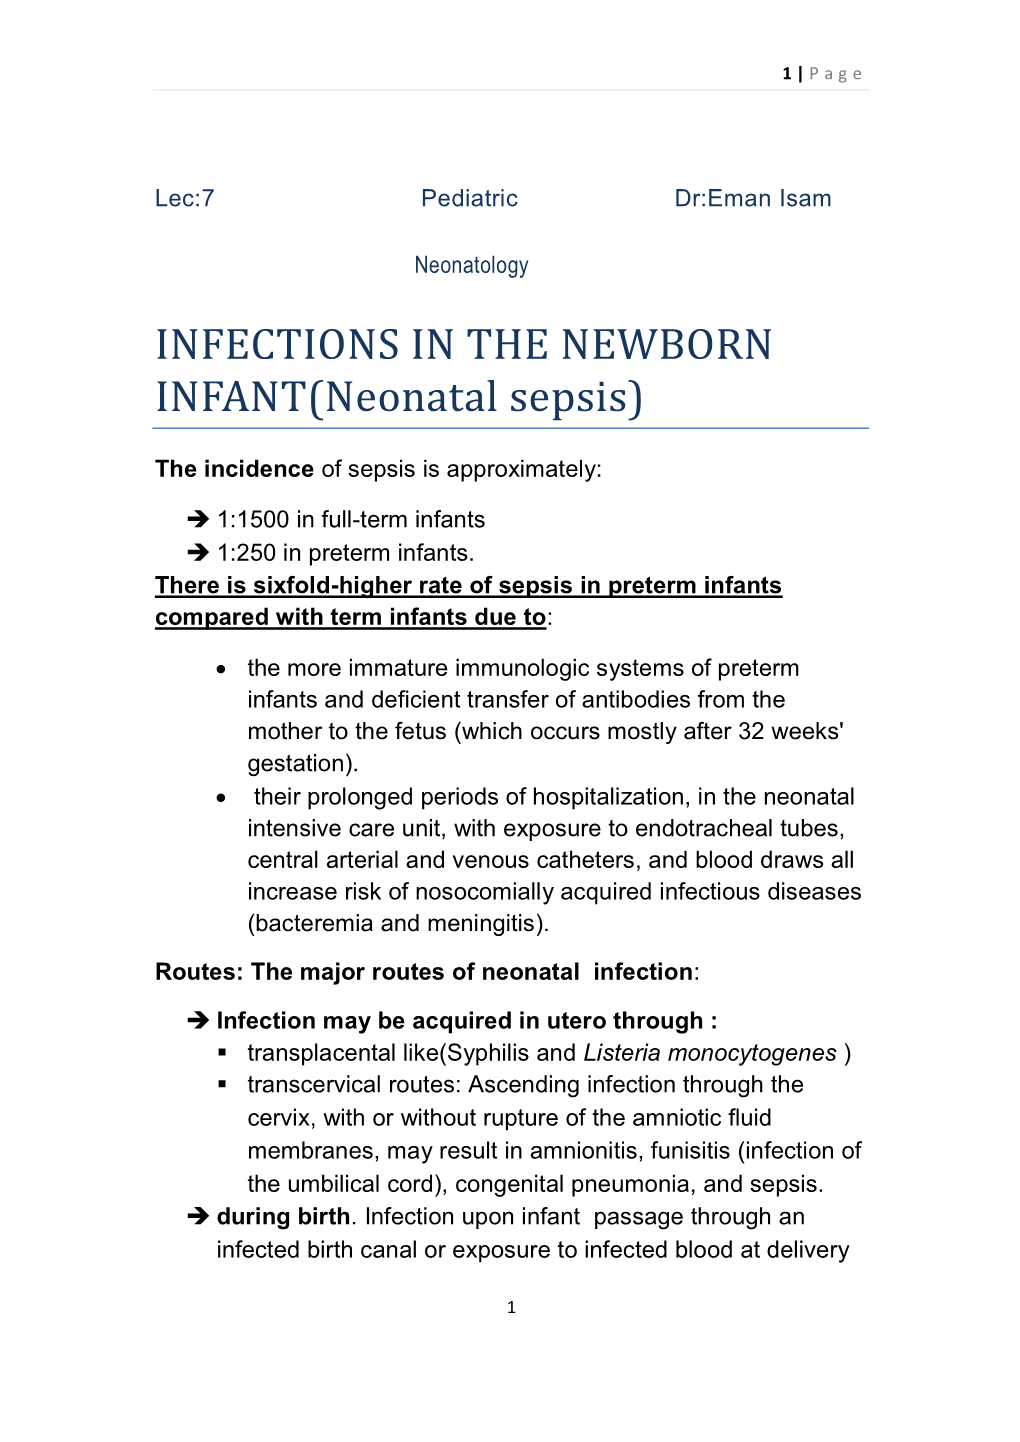 INFECTIONS in the NEWBORN INFANT(Neonatal Sepsis)